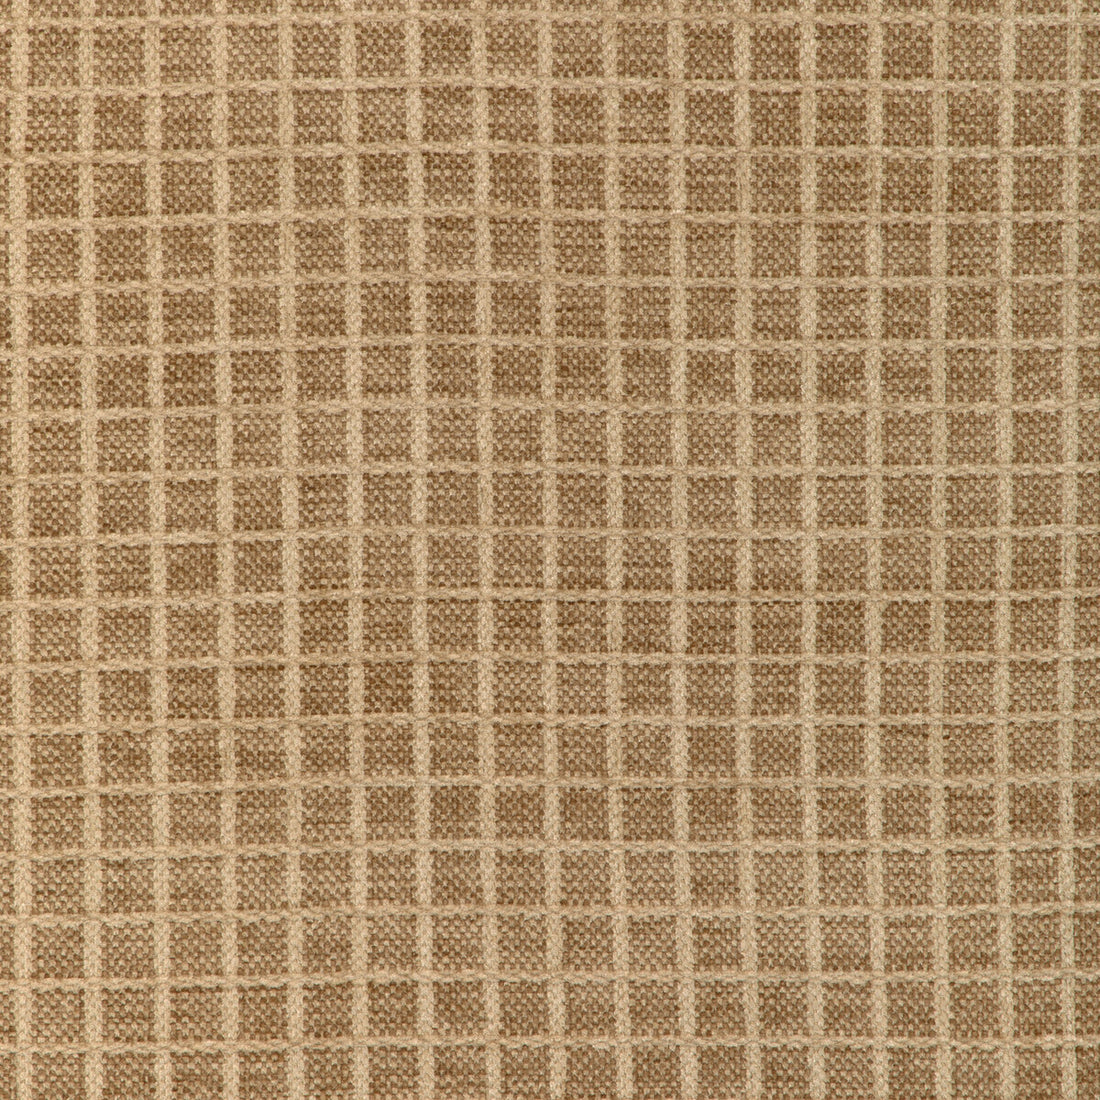 Chiron Texture fabric in beige color - pattern 8023155.16.0 - by Brunschwig &amp; Fils in the Chambery Textures IV collection